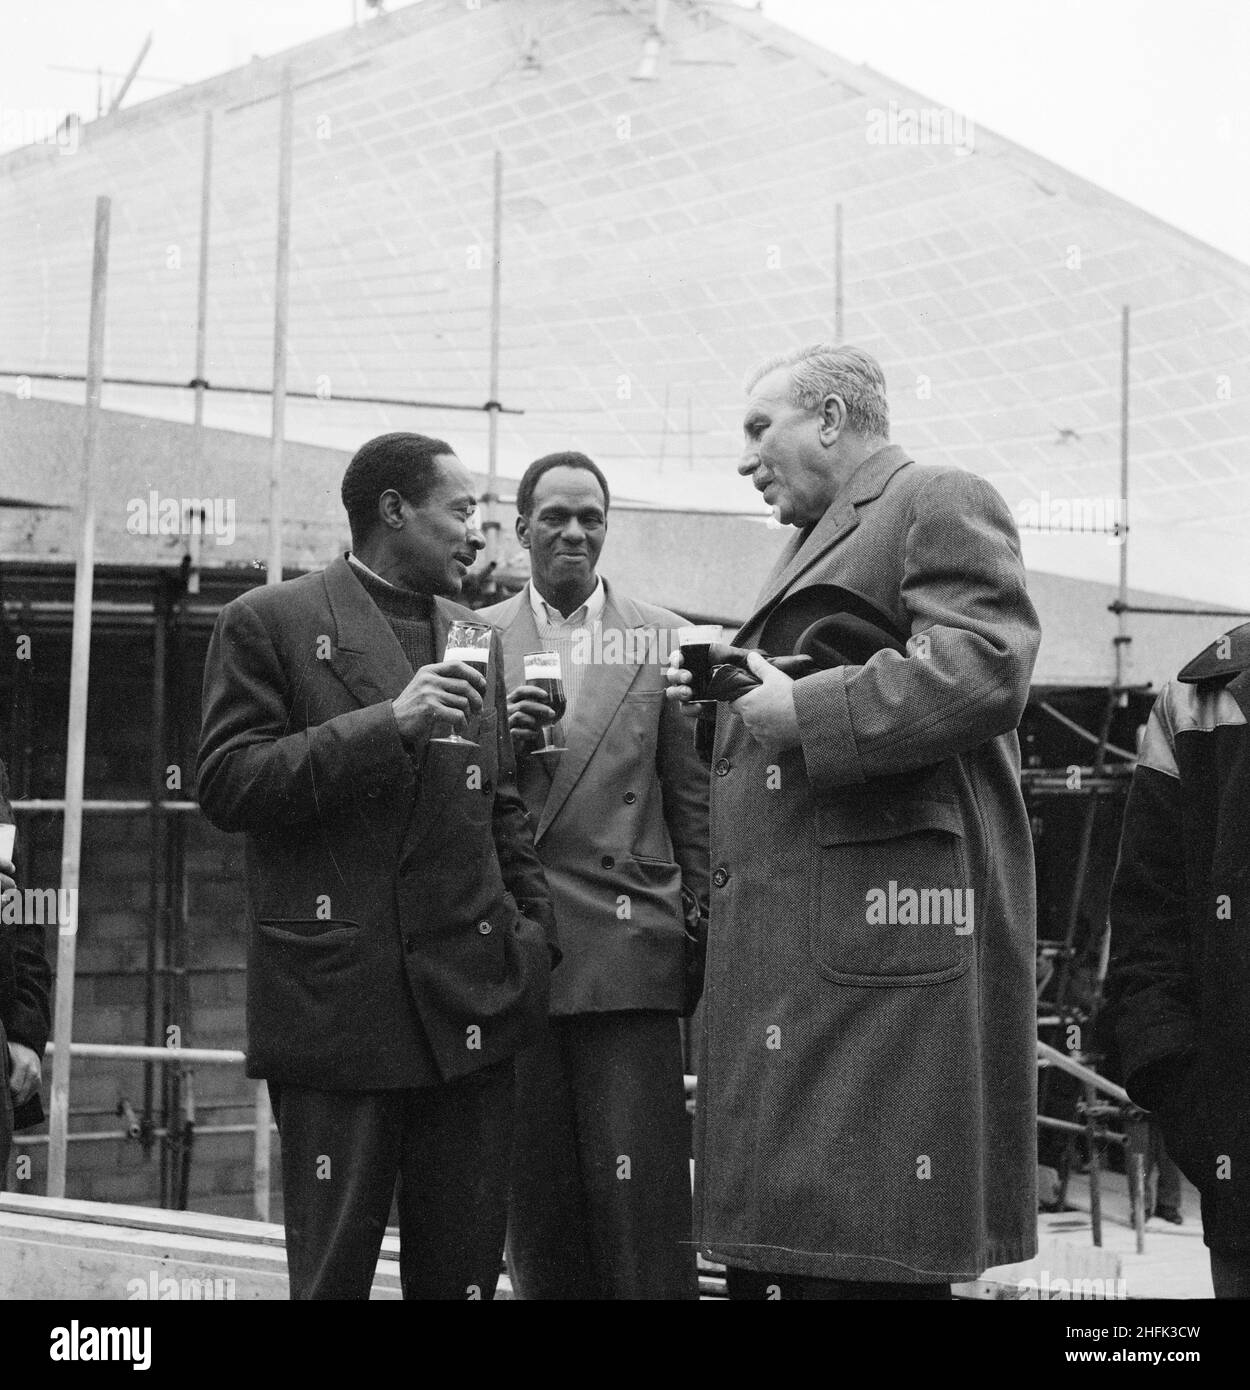 Commonwealth Institute, Kensington High Street, Kensington, London, 22/11/1961. Sir James Robertson, Chairman of the Board of Governors of the Commonwealth Institute (right) and two other men drinking beer at the topping out ceremony reception. Laing built the Commonwealth Institute between October 1960 and October 1962 to replace the former Imperial Institute that was to be demolished to make way for new facilities at Imperial College.  The building consisted of a four-storey administrative block housing a library, restaurant, board room and conference hall and a separate two-storey b lock co Stock Photo